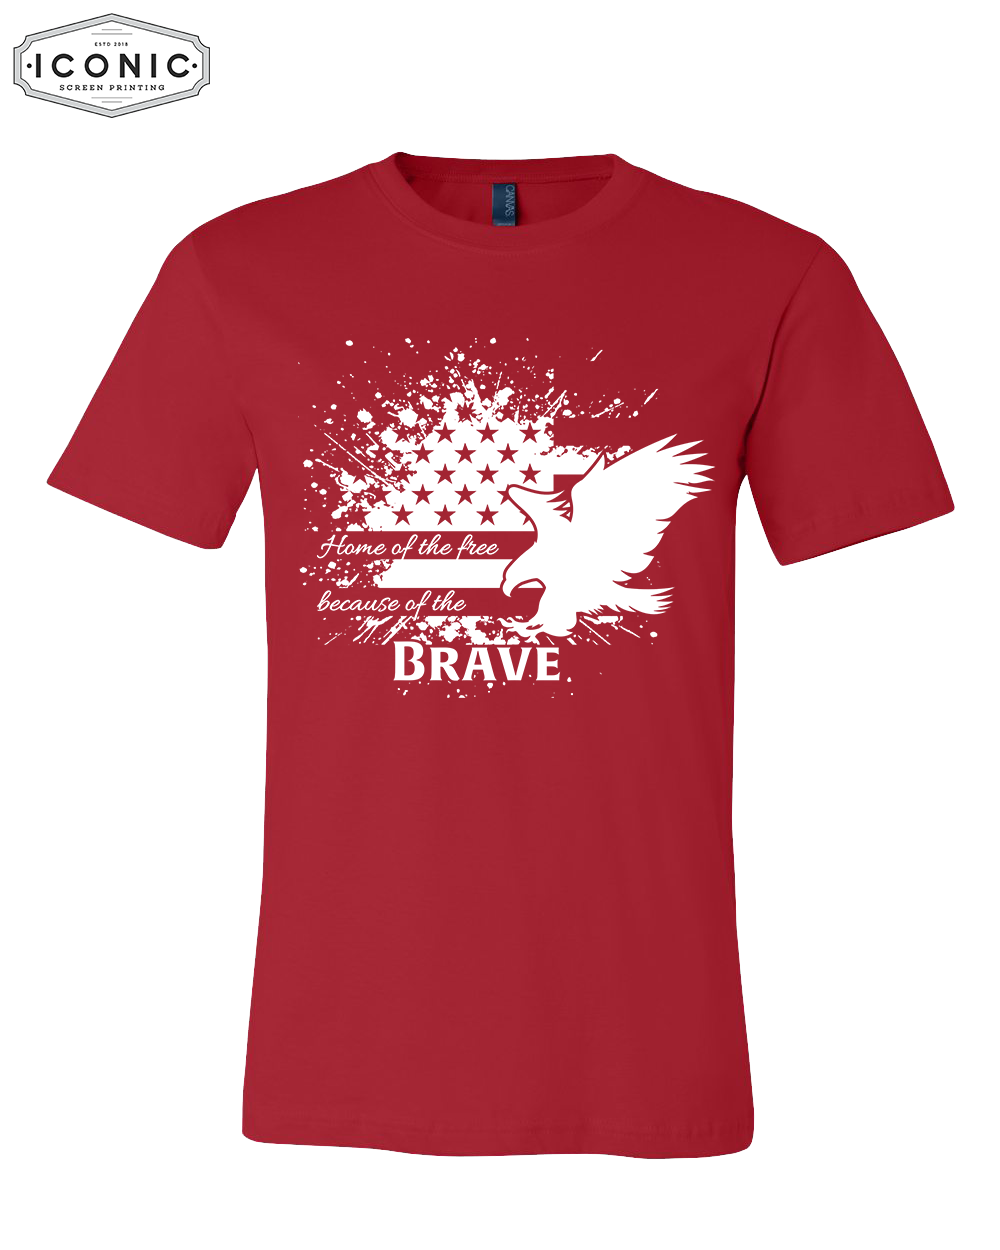 Because of the Brave  - Unisex Jersey Tee